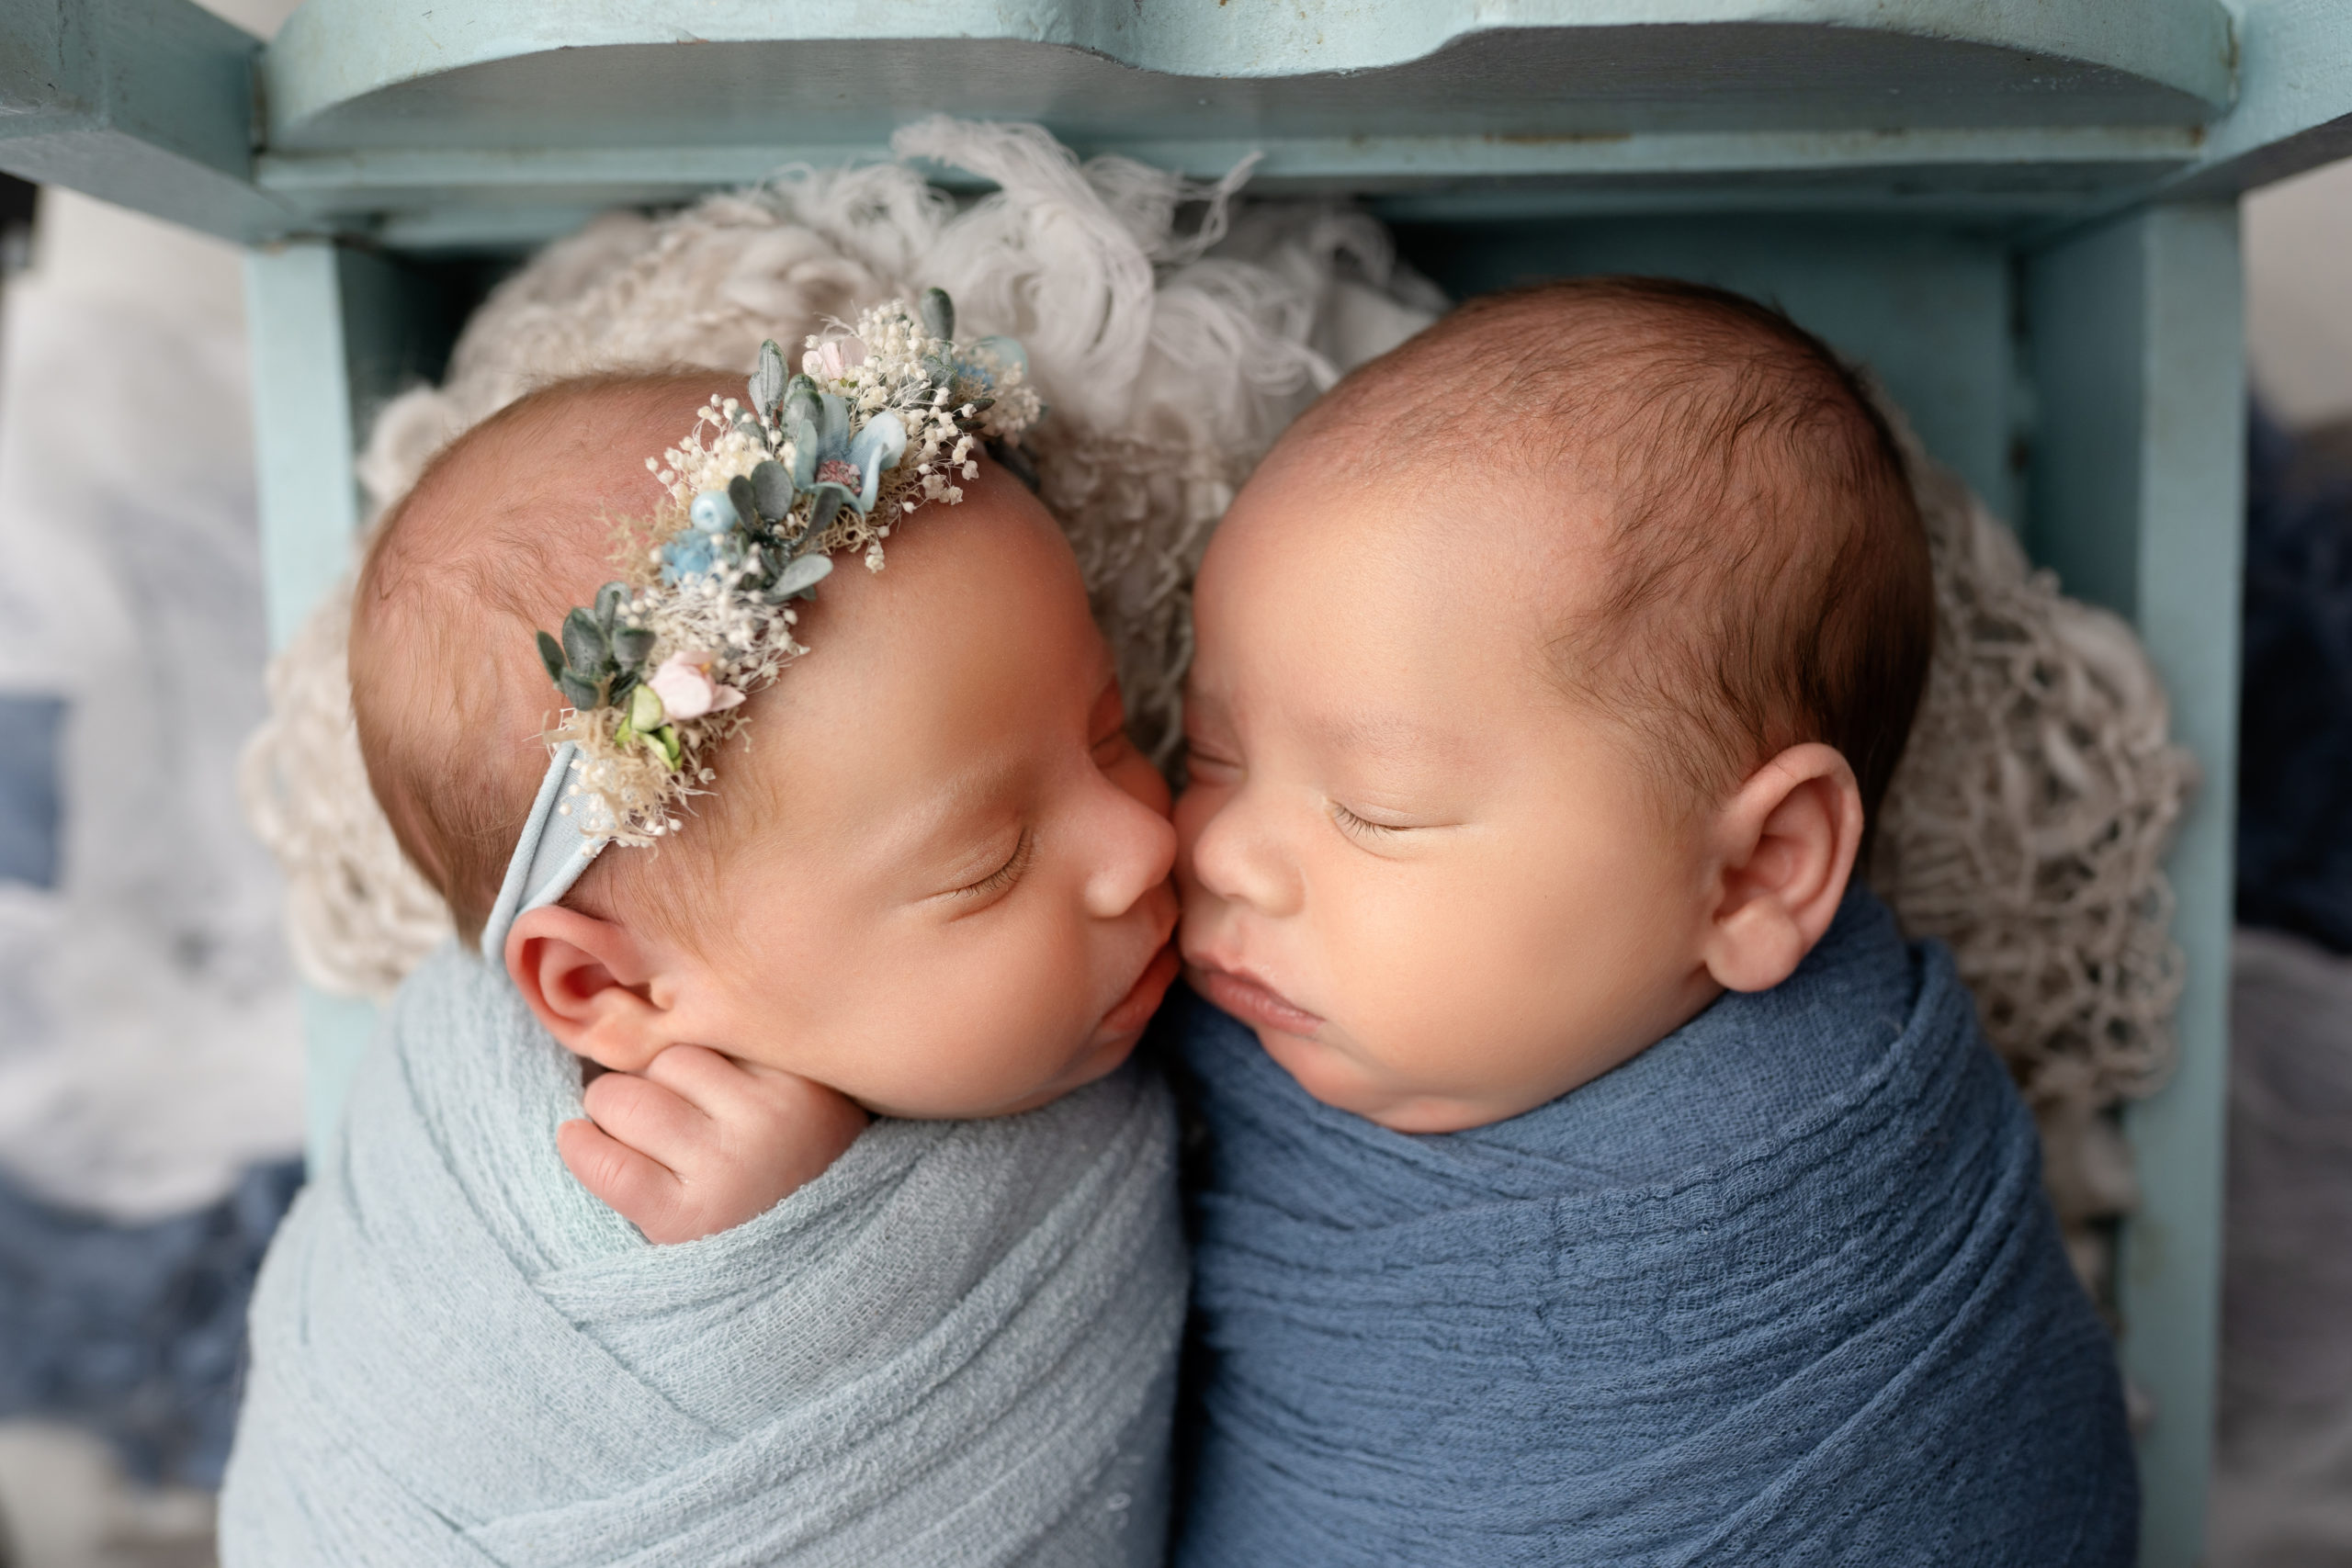 newborn twins lay wrapped with faces touching